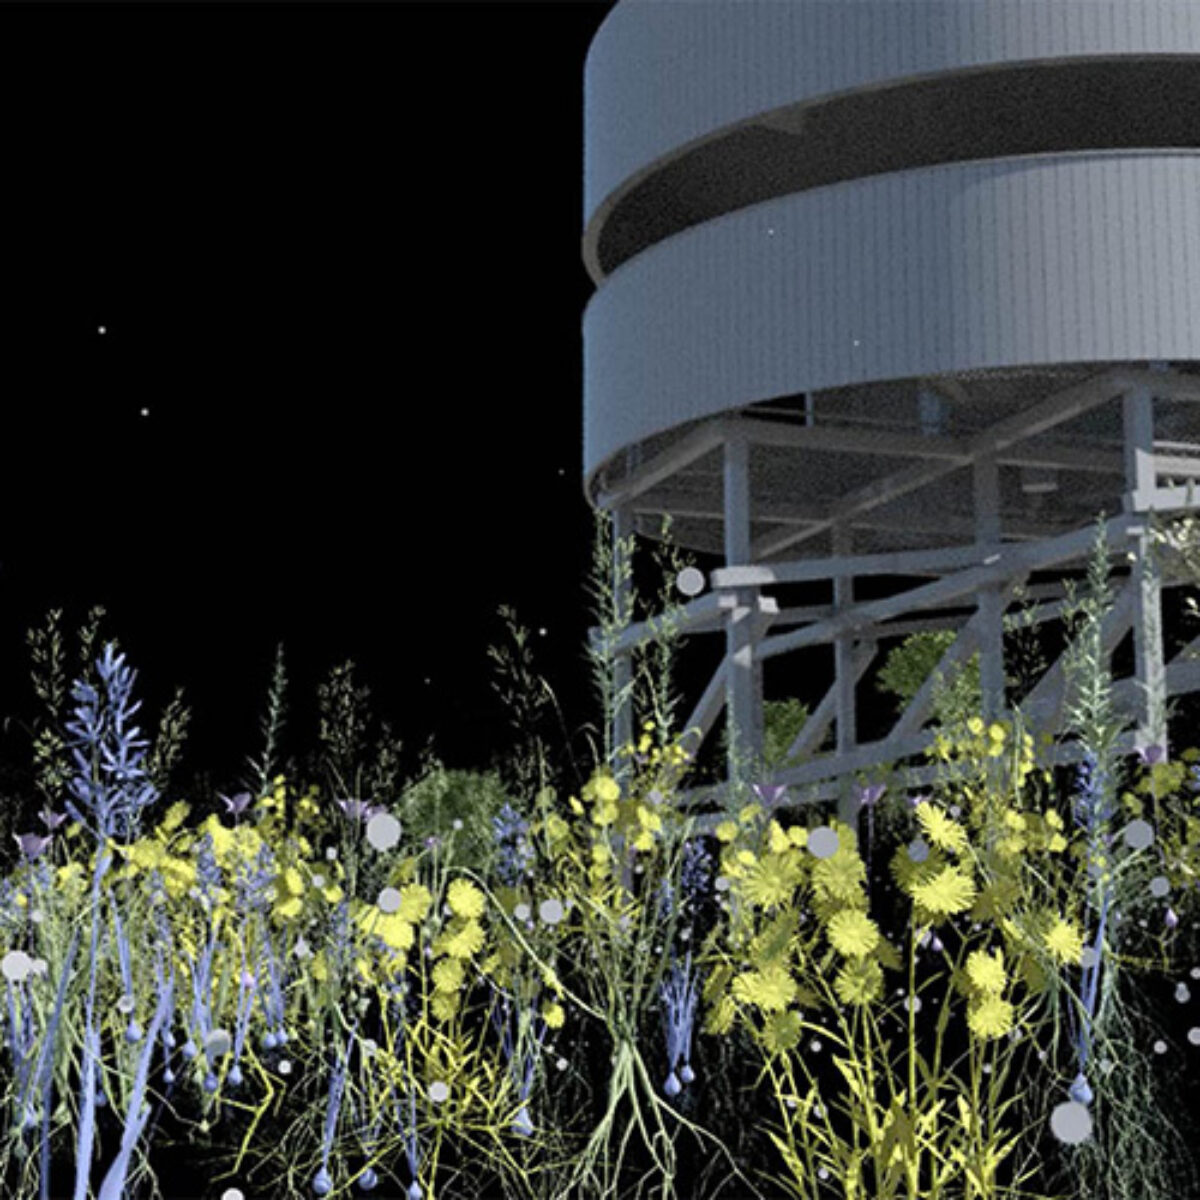 A rendering of a white tower structure in a field of organic growth and flowers.